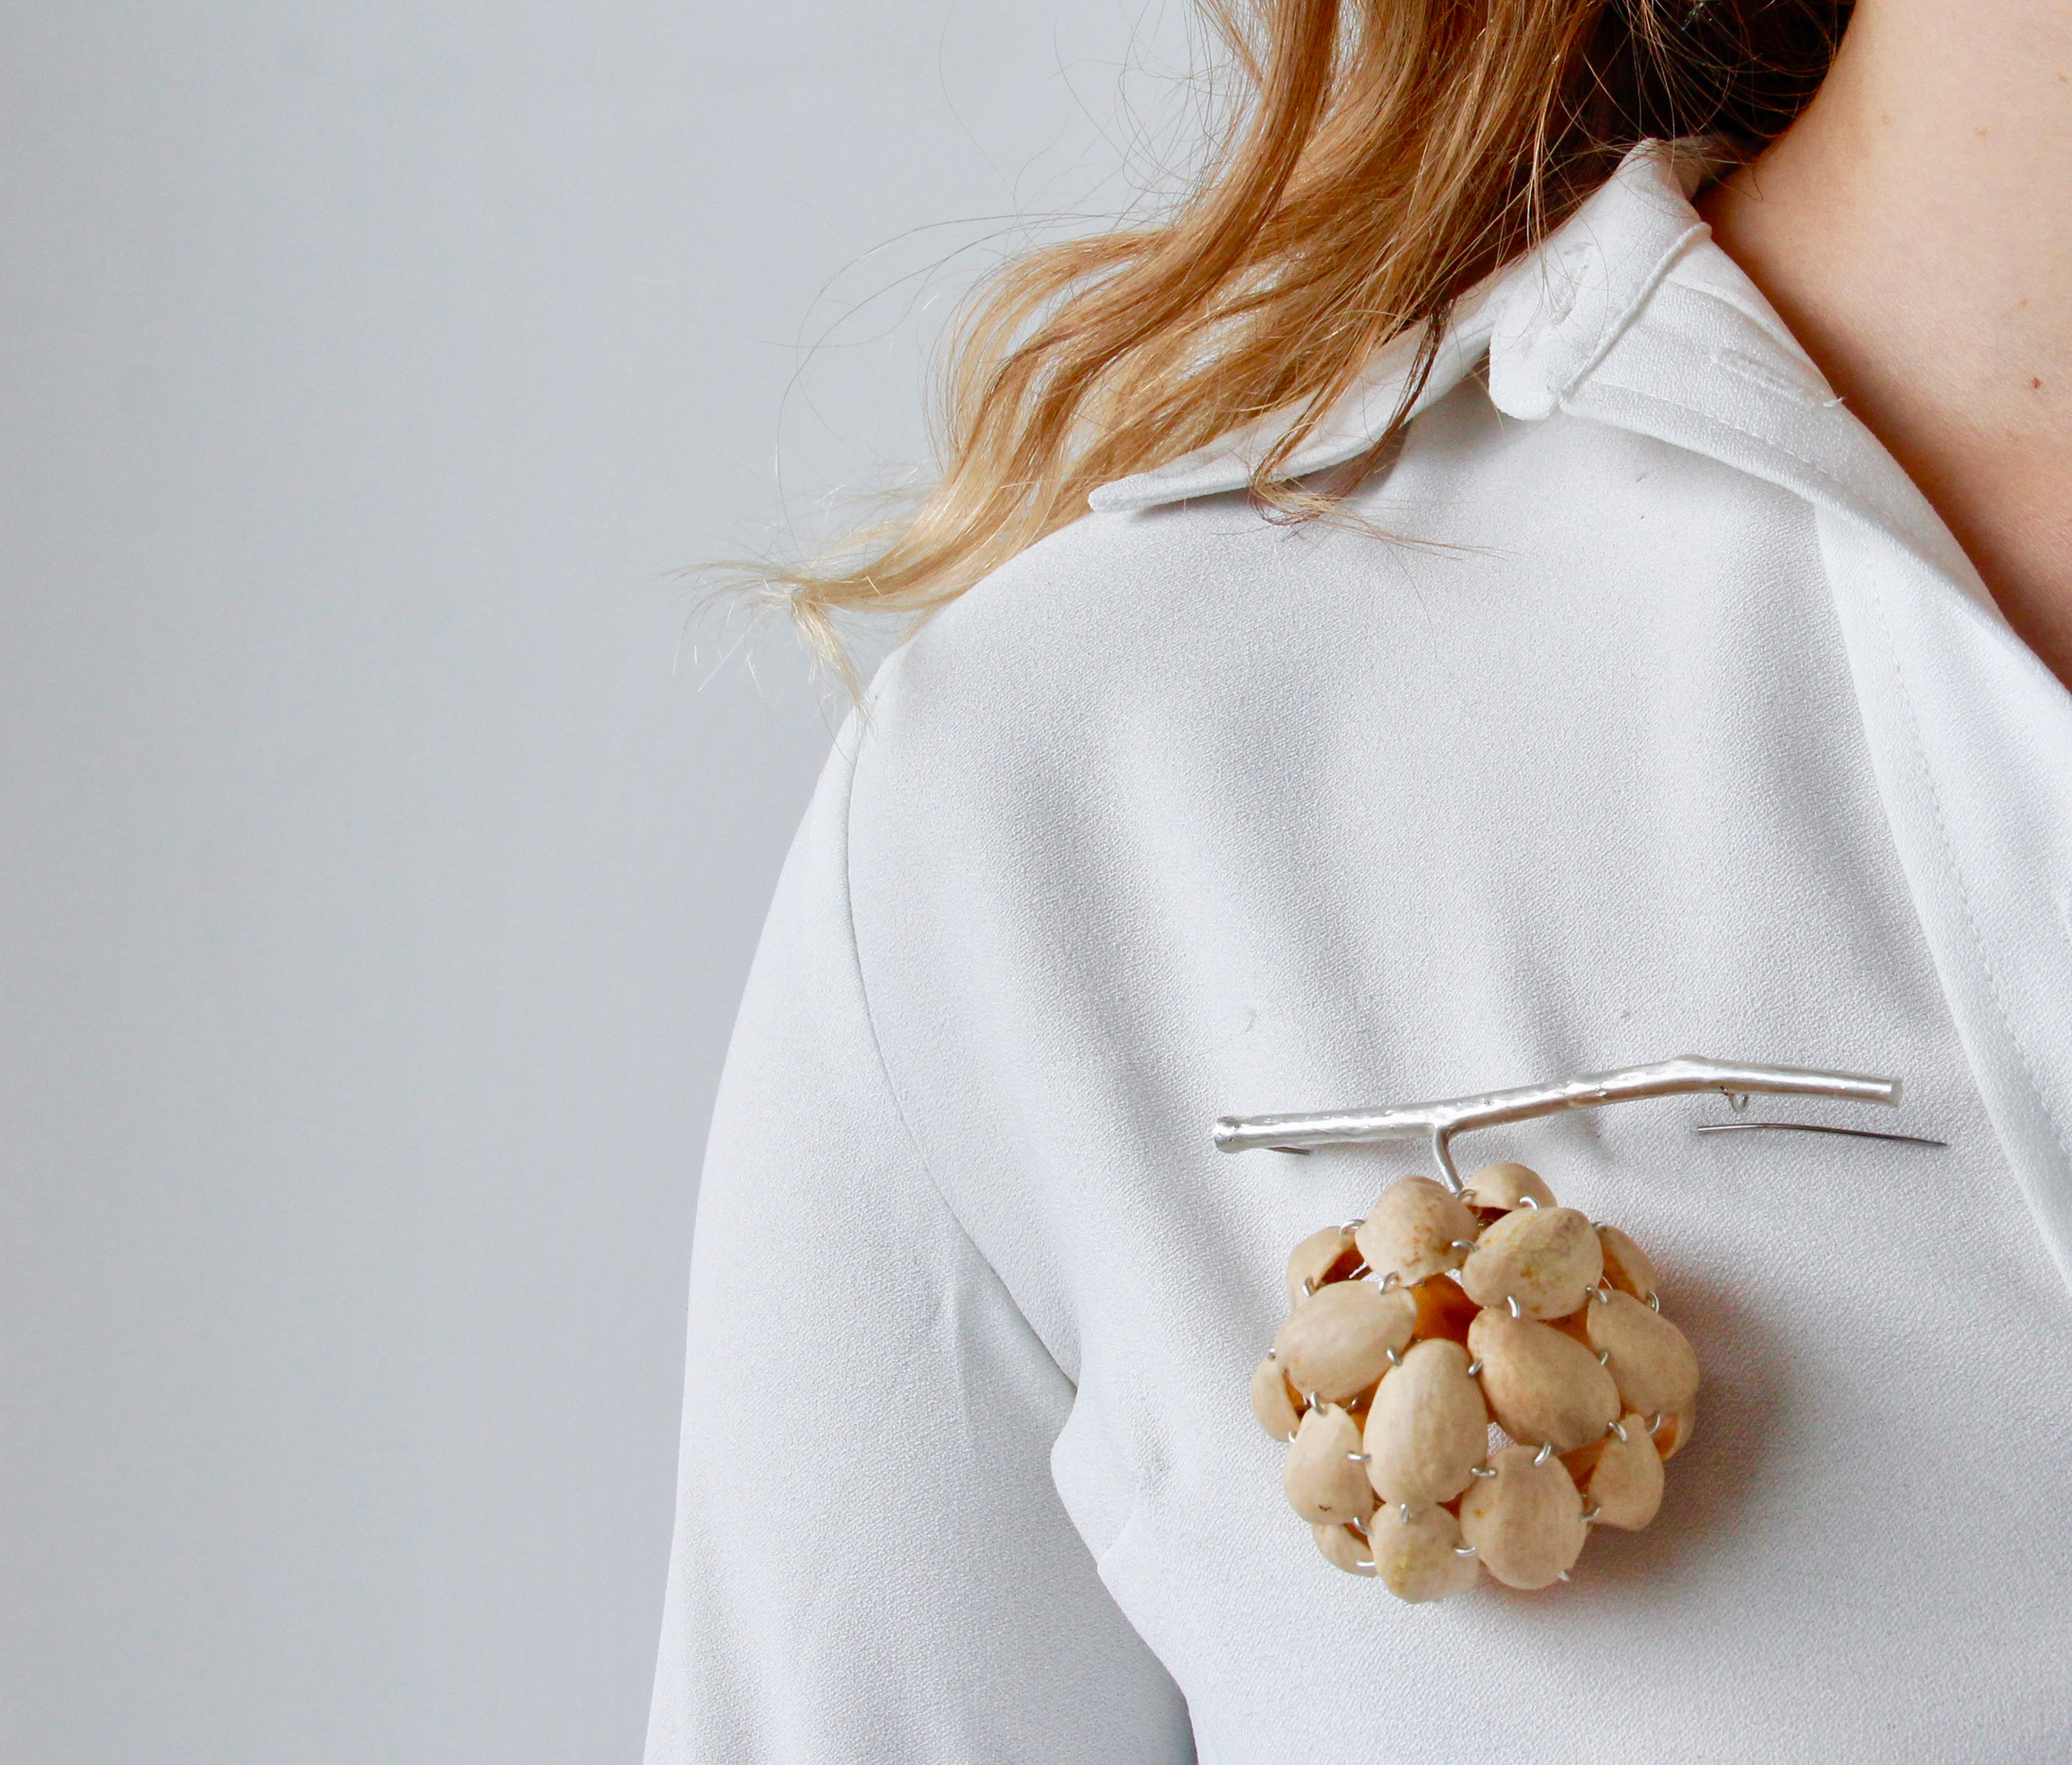 Belle Smith makes jewellery from discarded pistachio shells